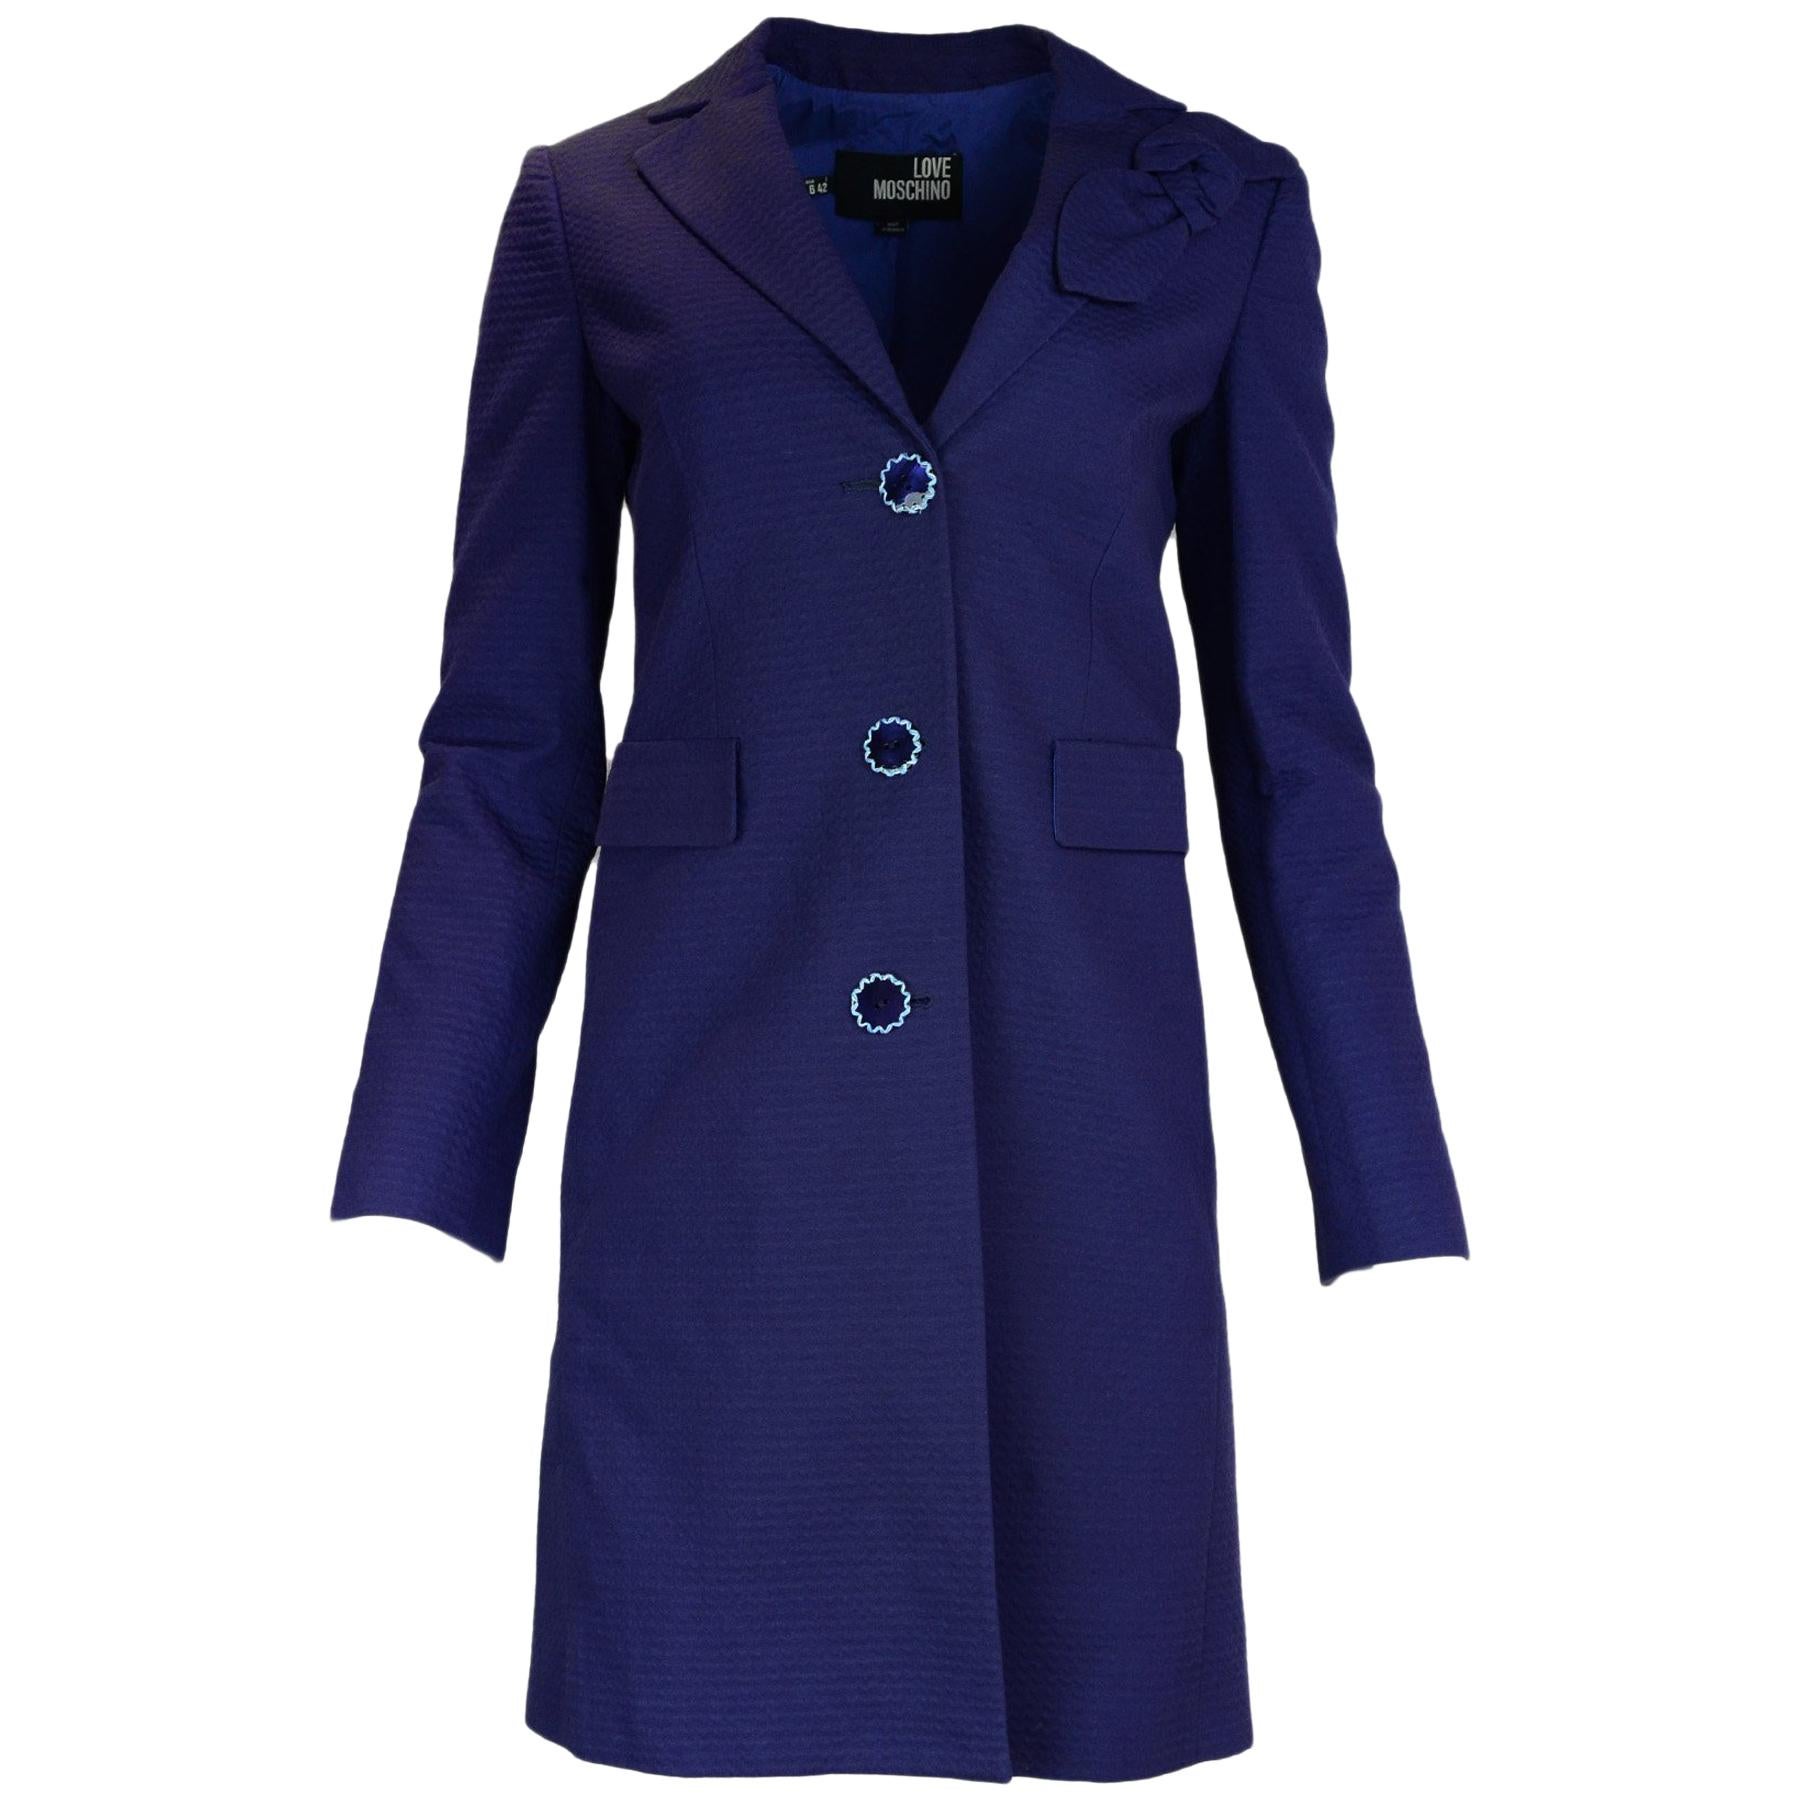 Love Moschino Blue Cotton Coat W/ Bow & Whipstitch Buttons Sz 6